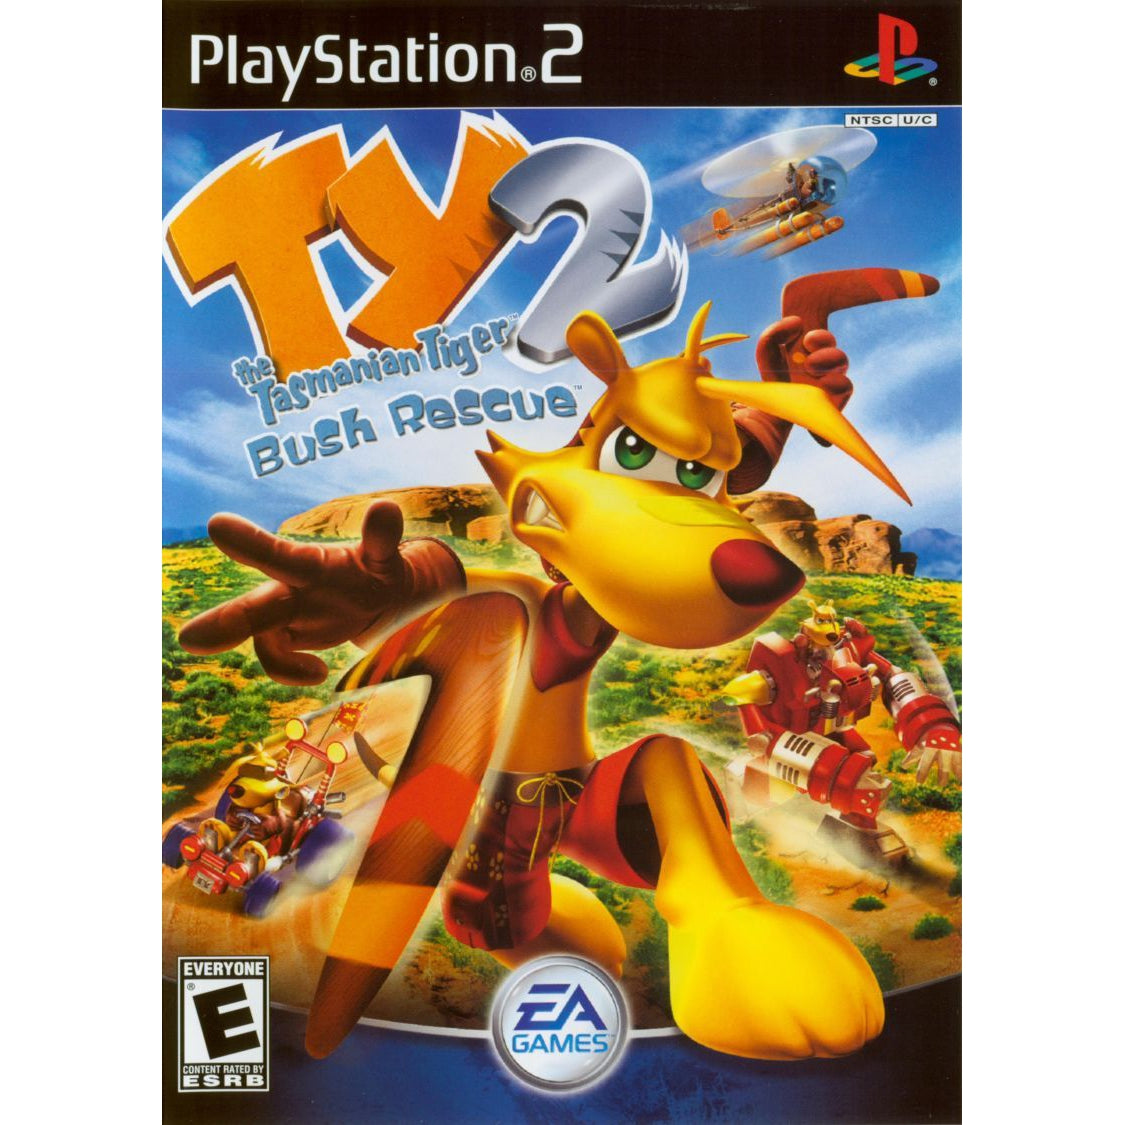 Ty the Tasmanian Tiger 2: Bush Rescue - PlayStation 2 (PS2) Game Complete - YourGamingShop.com - Buy, Sell, Trade Video Games Online. 120 Day Warranty. Satisfaction Guaranteed.